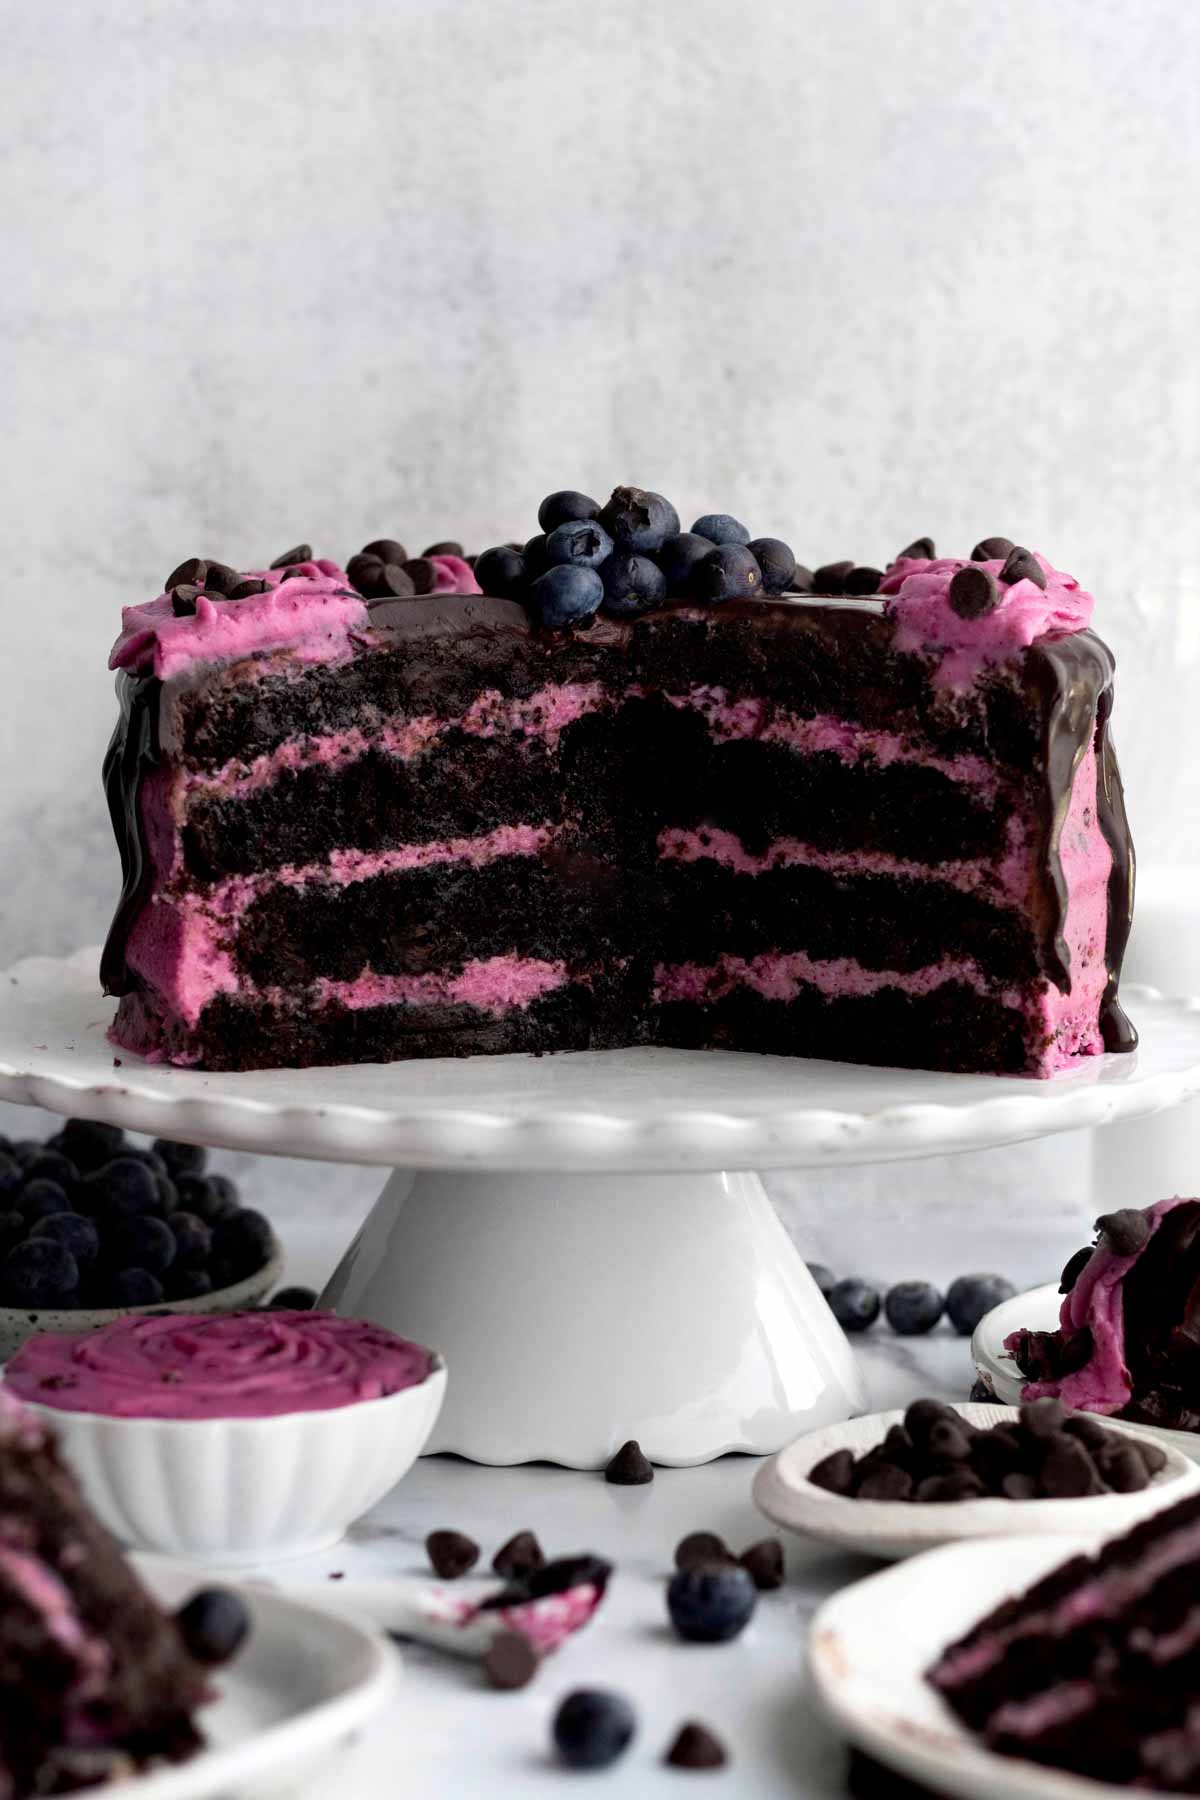 A look at the inside layers of cake and blueberry frosting.